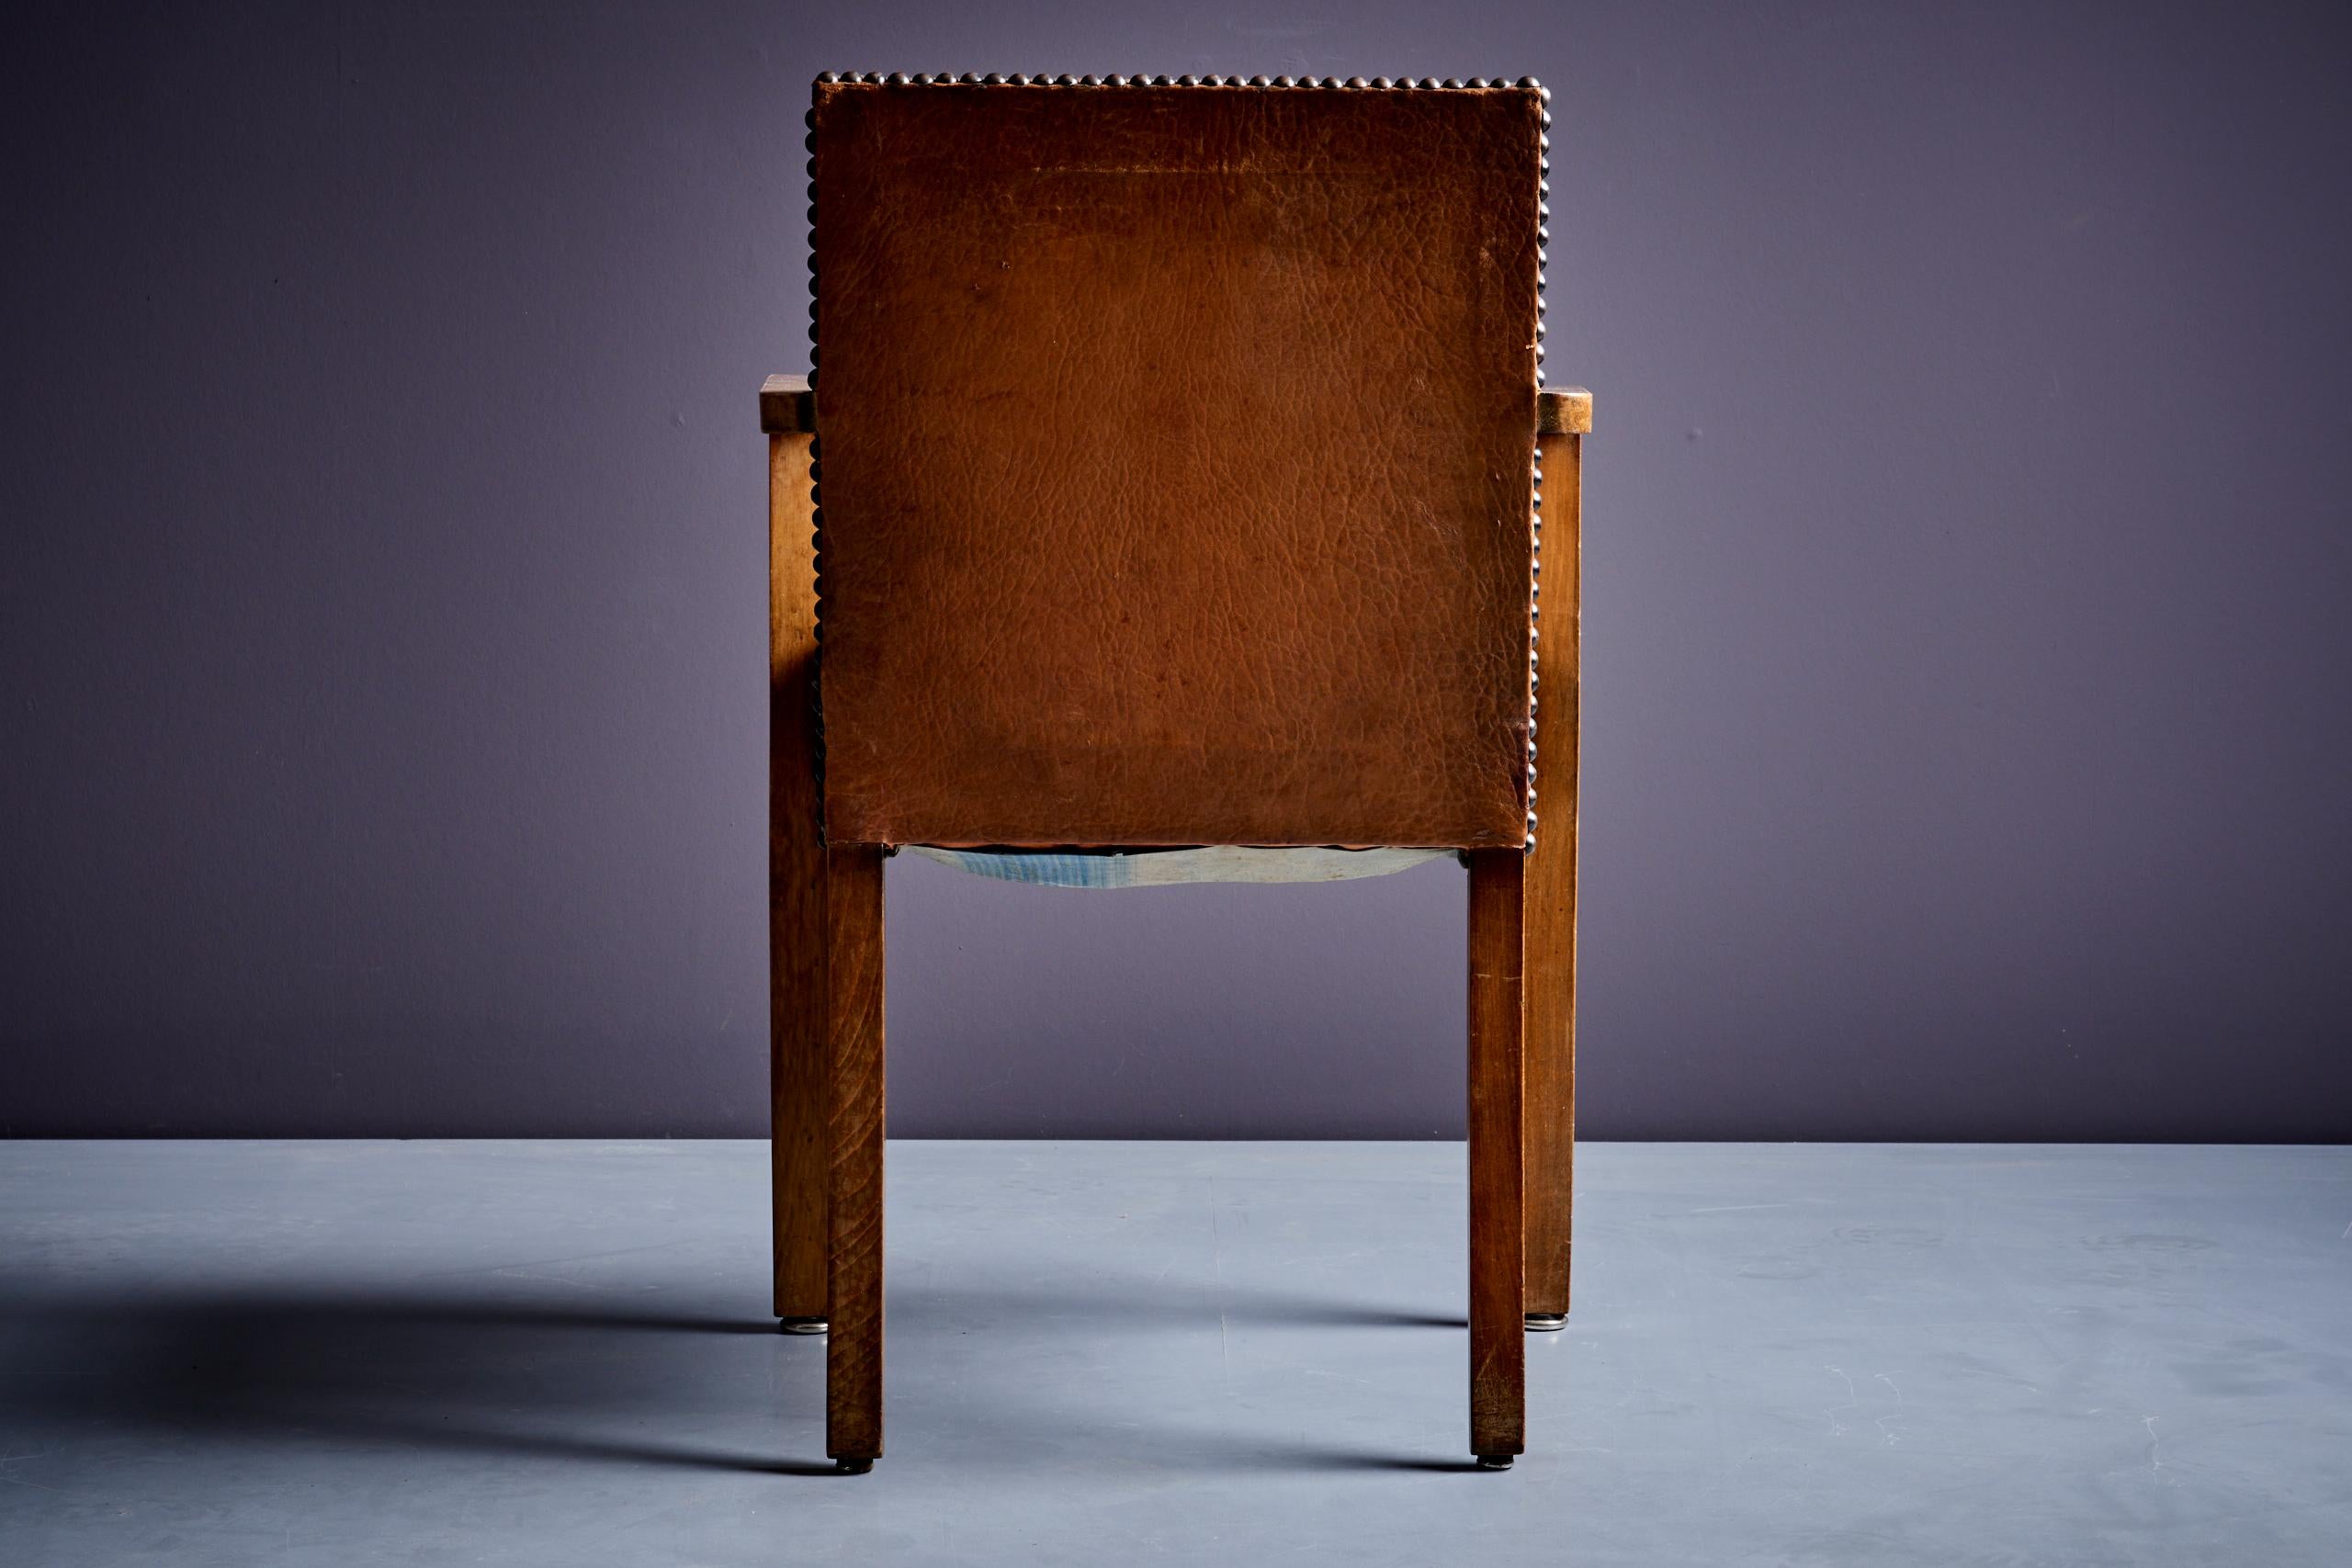 Faux Leather Art Deco Arm Chair attributed to Francis Jourdain 1940s brown leather For Sale